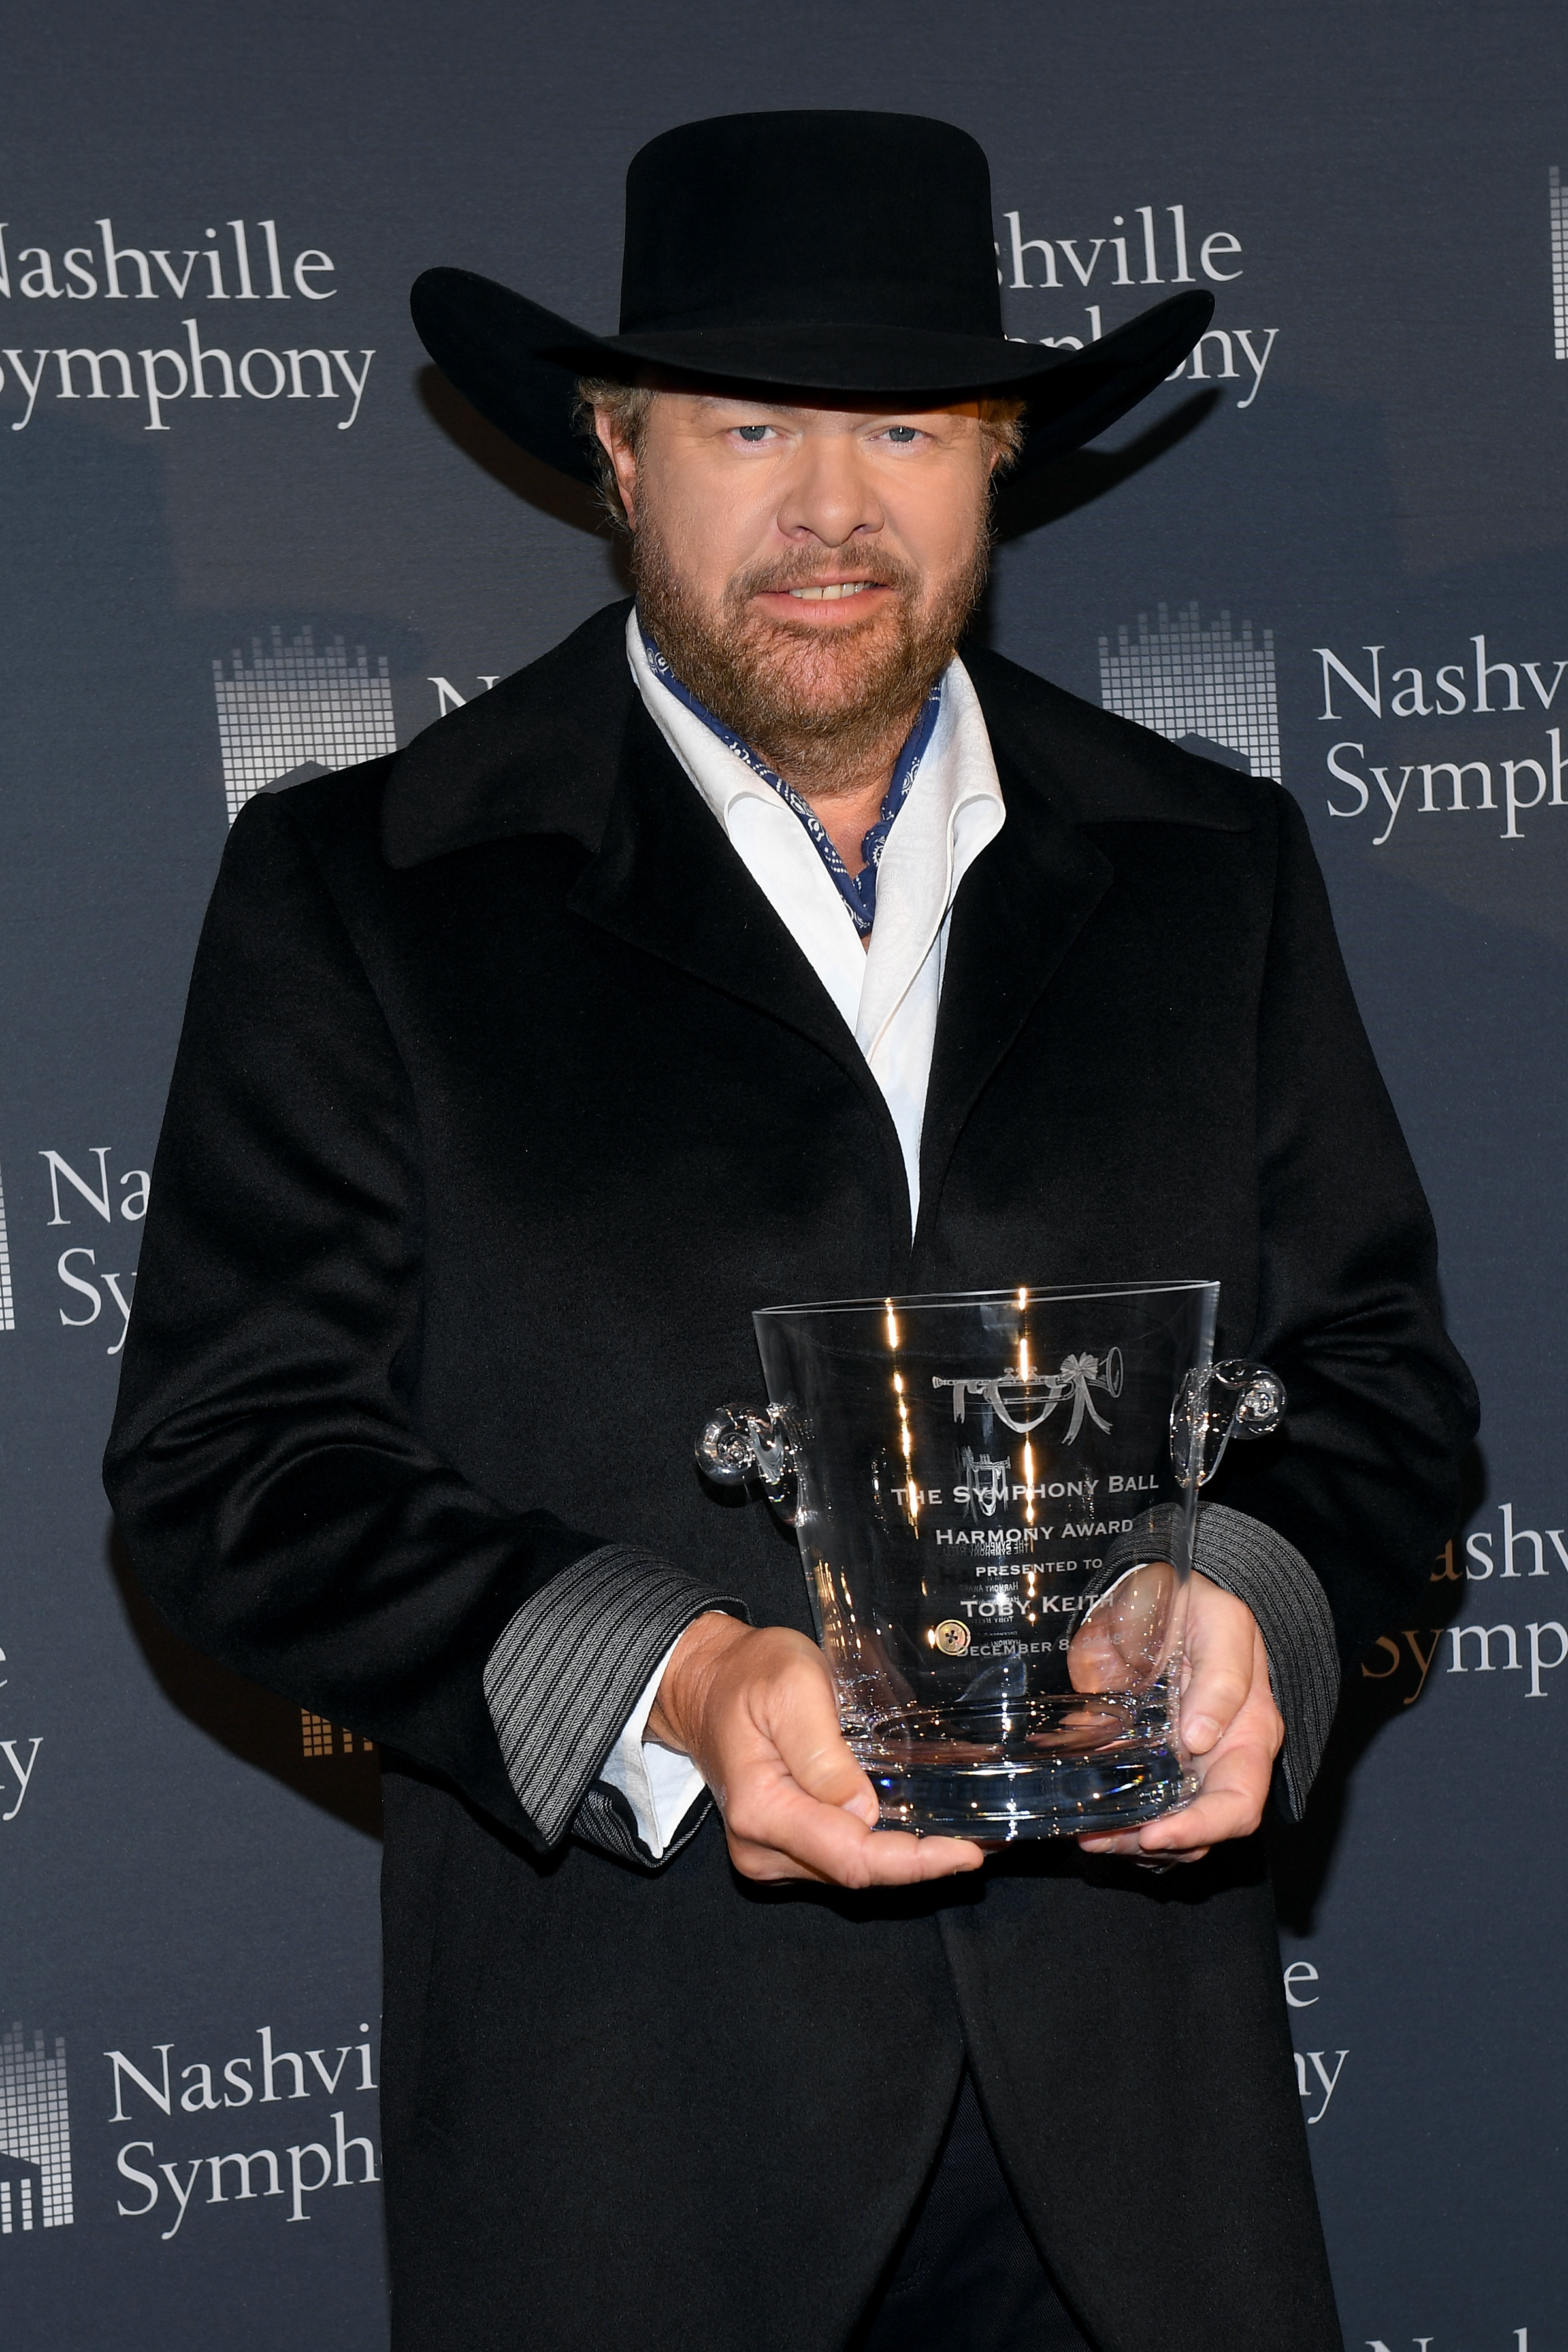 Toby Keith attends the 34th Annual Nashville Symphony Ball at Schermerhorn Symphony Center in Nashville, Tennessee on December 8, 2018. | Source: Getty Images